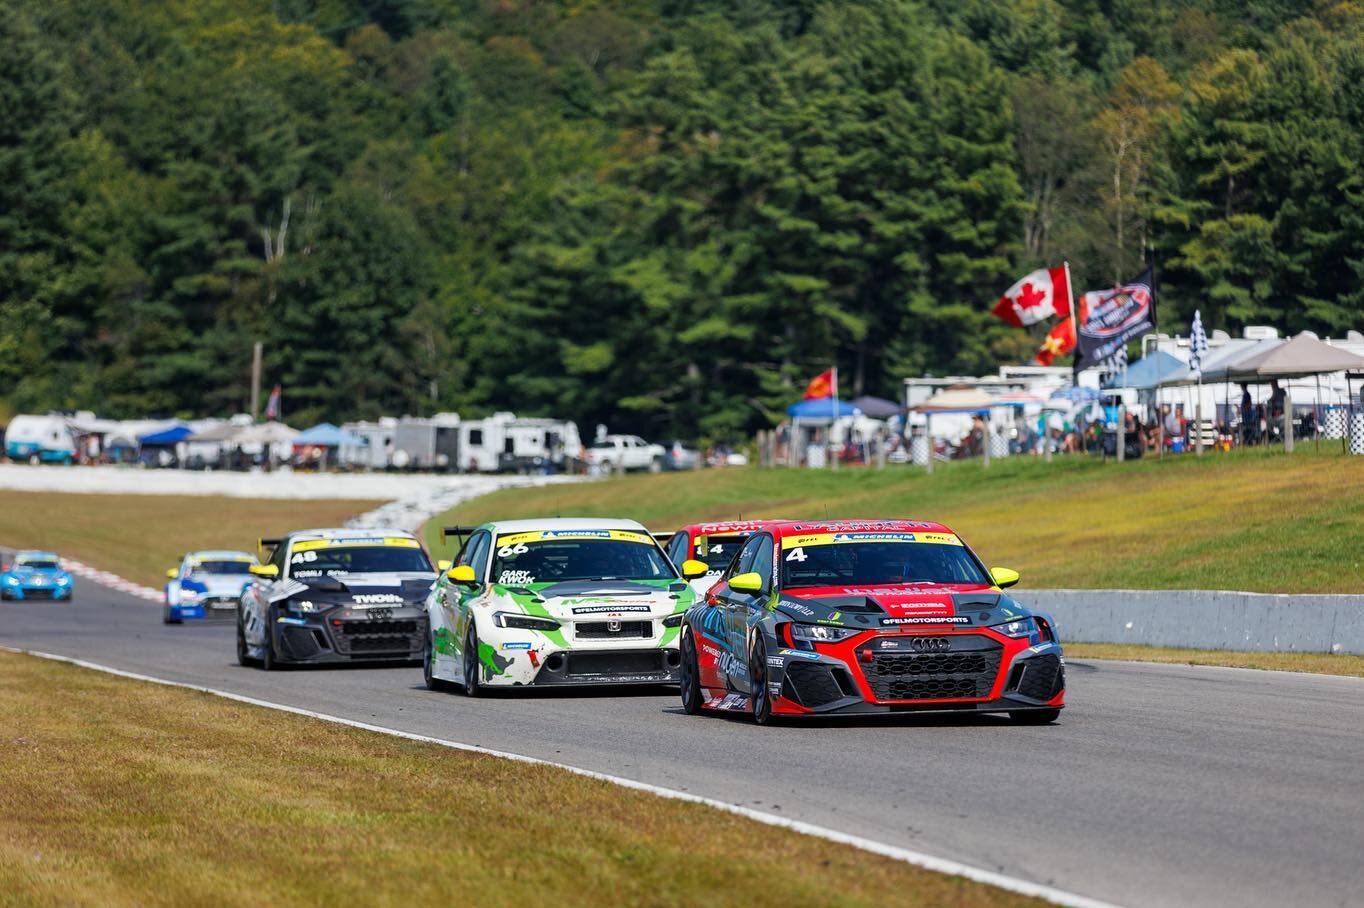 This past weekend wrapped up the 2023 season. Although it ended sooner than we expected there is a lot to be proud of this season. 

We finished P3 in the TCR championship. 3 wins this season, 5 podiums in total. A lot of progression as a driver and 